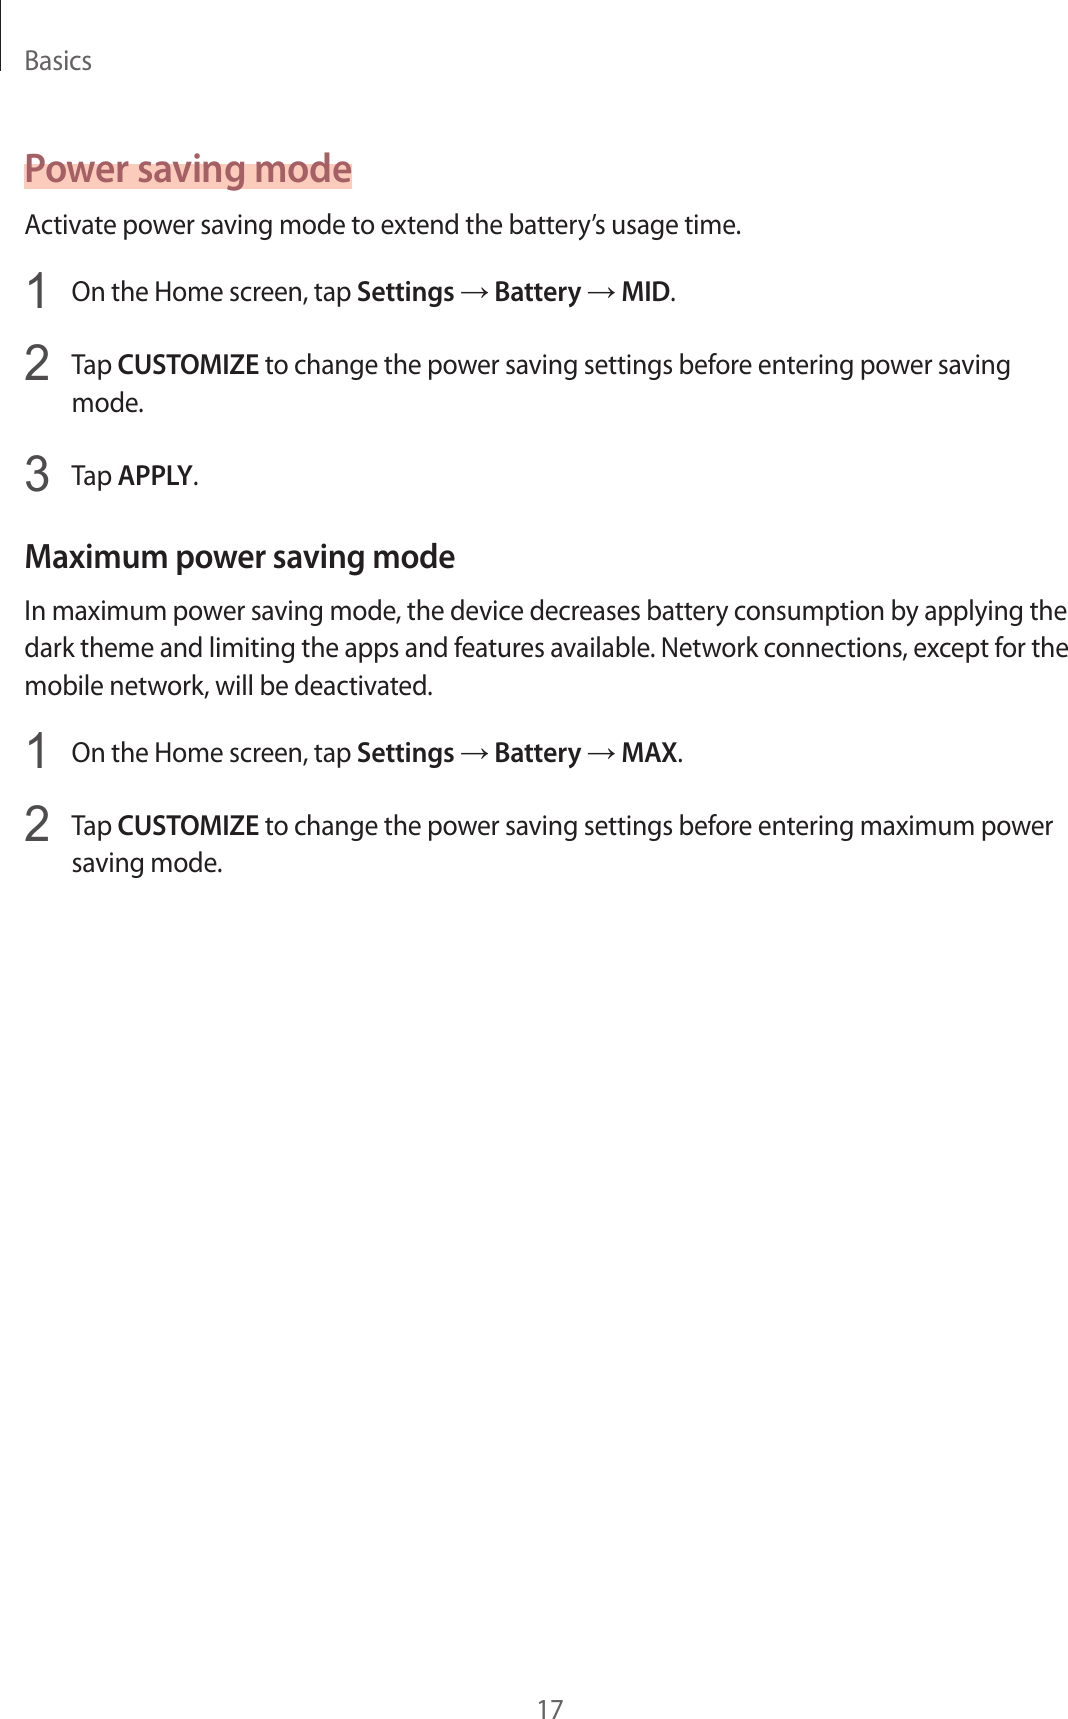 Basics17Power saving modeActivate power saving mode to extend the battery’s usage time.1  On the Home screen, tap Settings → Battery → MID.2  Tap CUSTOMIZE to change the power saving settings before entering power saving mode.3  Tap APPLY.Maximum power saving modeIn maximum power saving mode, the device decreases battery consumption by applying the dark theme and limiting the apps and features available. Network connections, except for the mobile network, will be deactivated.1  On the Home screen, tap Settings → Battery → MAX.2  Tap CUSTOMIZE to change the power saving settings before entering maximum power saving mode.